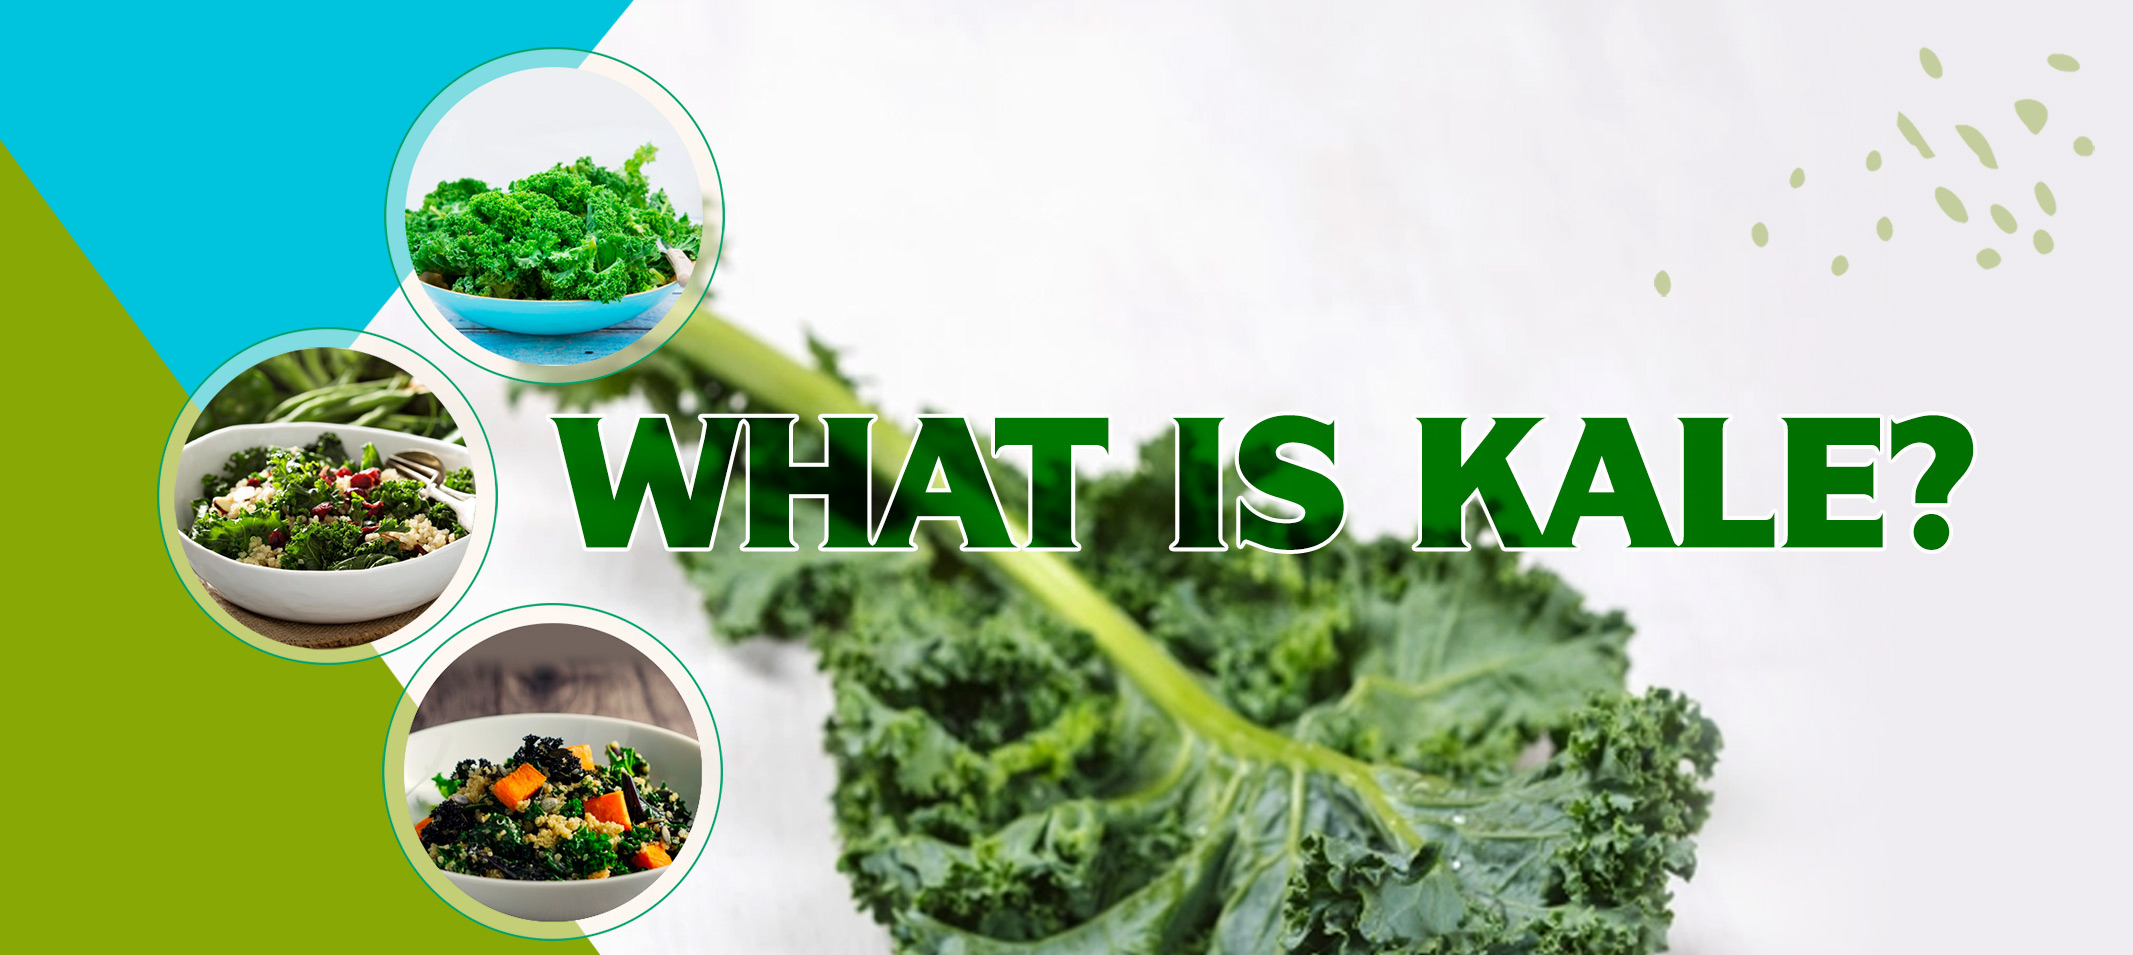 What is Kale? What are its health benefits?